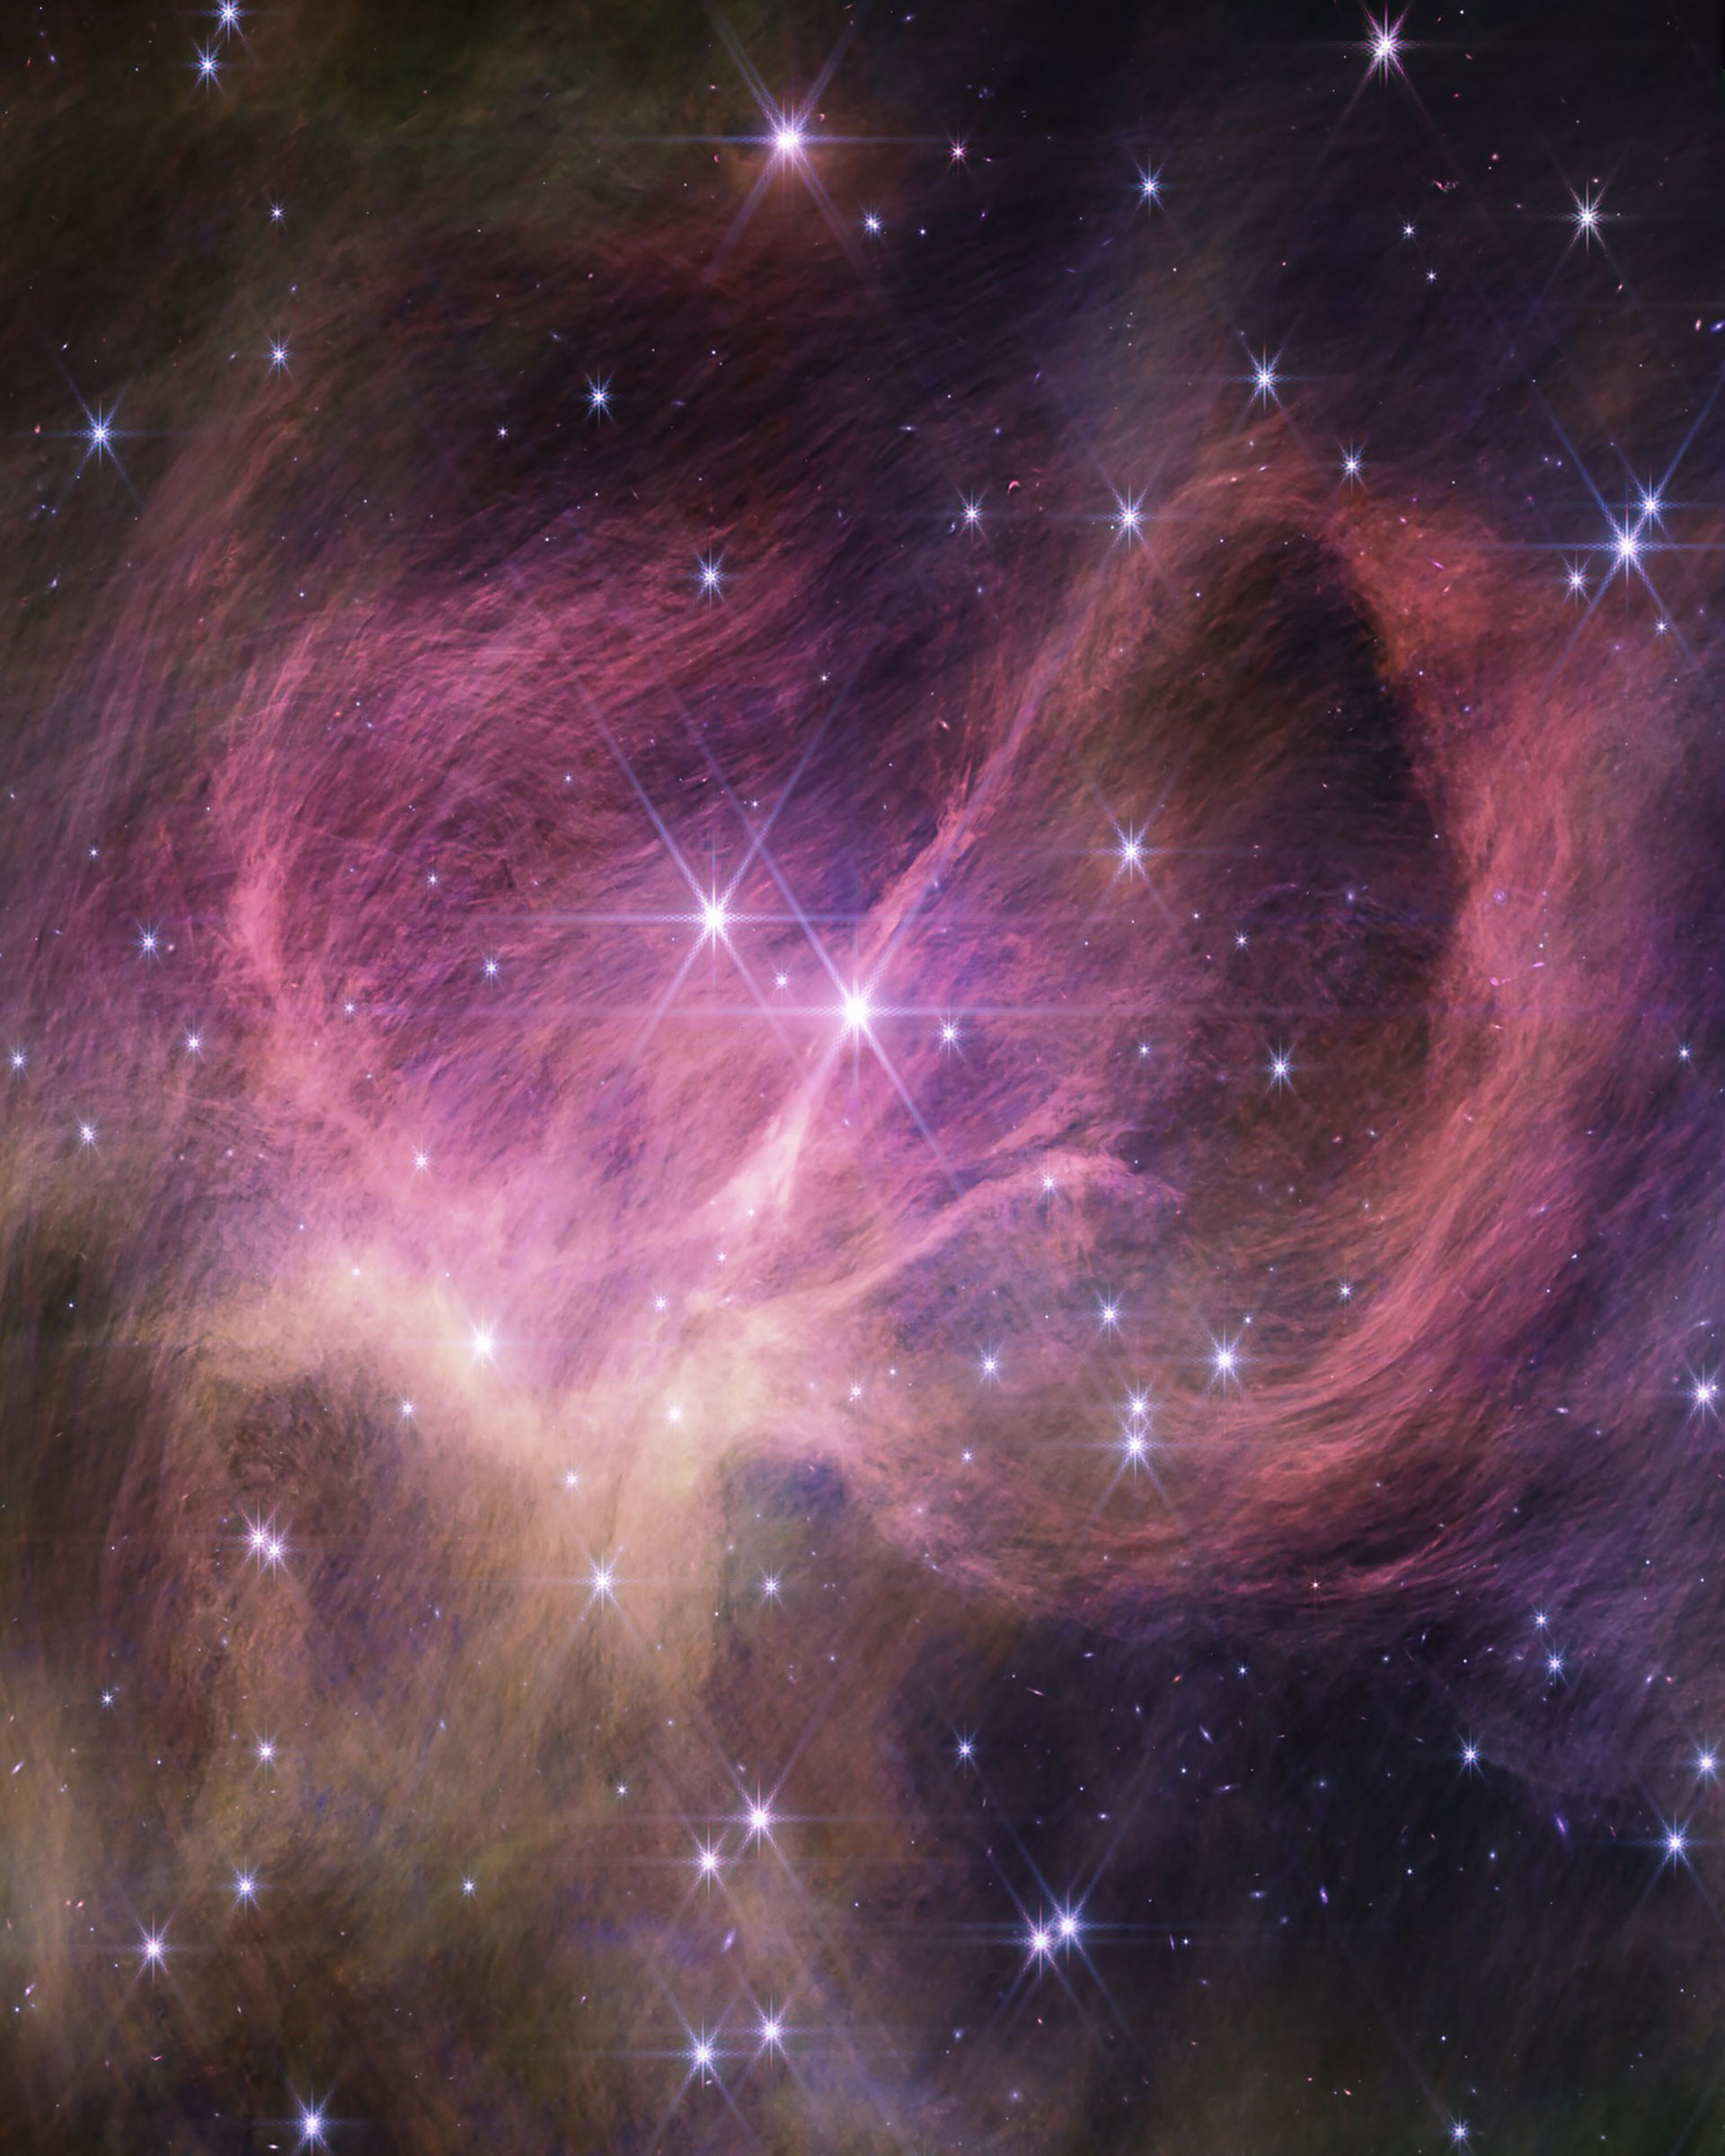 Wispy hair-like filaments of pink-purple fill the middle of the image, curving left and right on either side of the center. On the right, the filaments form a dramatic loop that seems to extend toward the viewer. At lower left are additional yellowsish filaments. Two prominent, bright stars near the center of the image show Webb’s eight-point diffraction spikes. Dozens of fainter stars are scattered across the image.